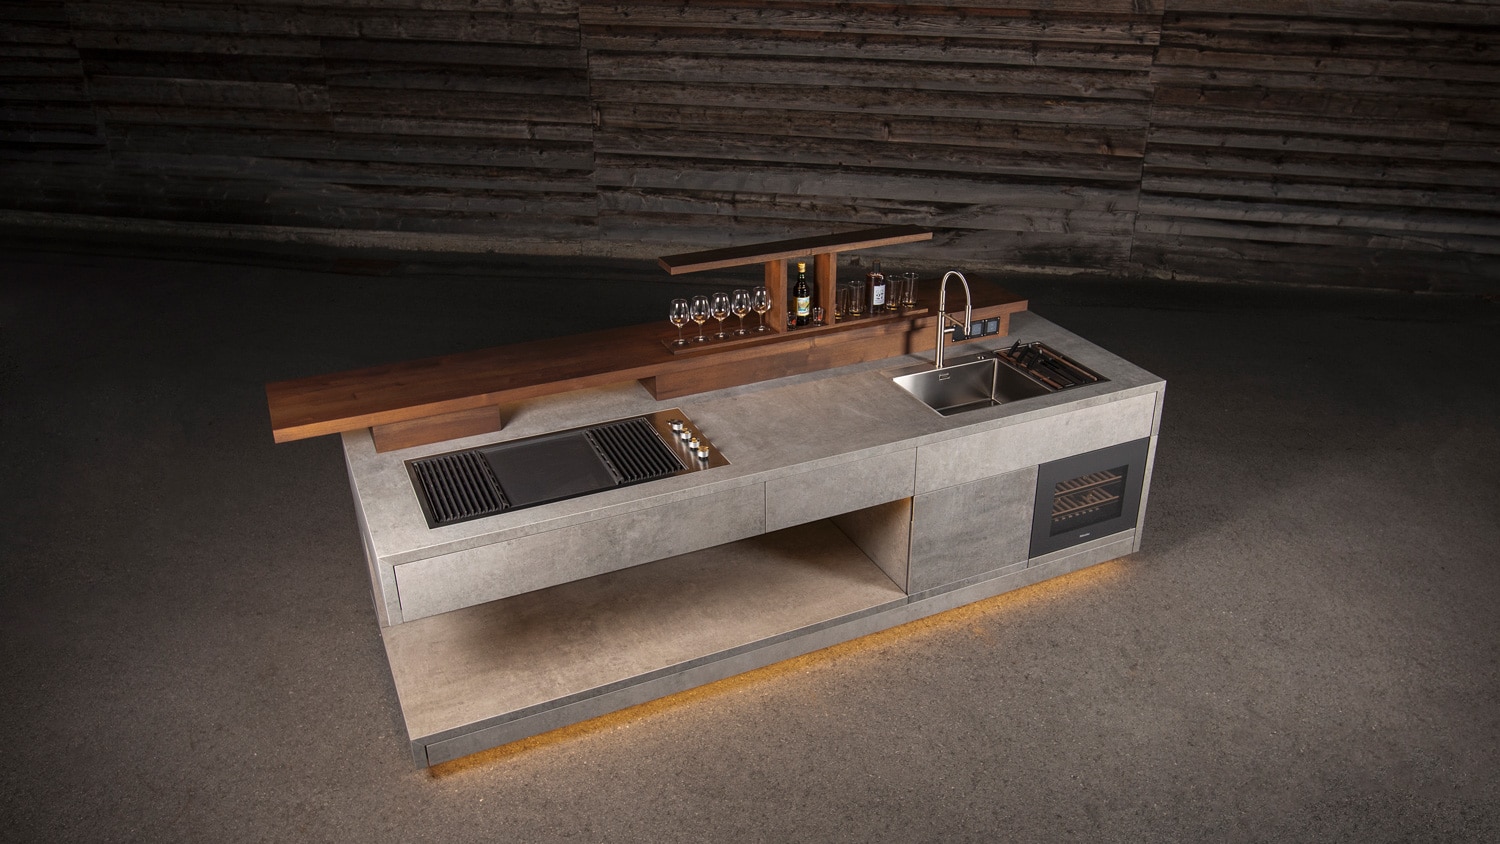 Image of Prime Two Widnau7 in Outdoor kitchens for a luxury garden - Cosentino